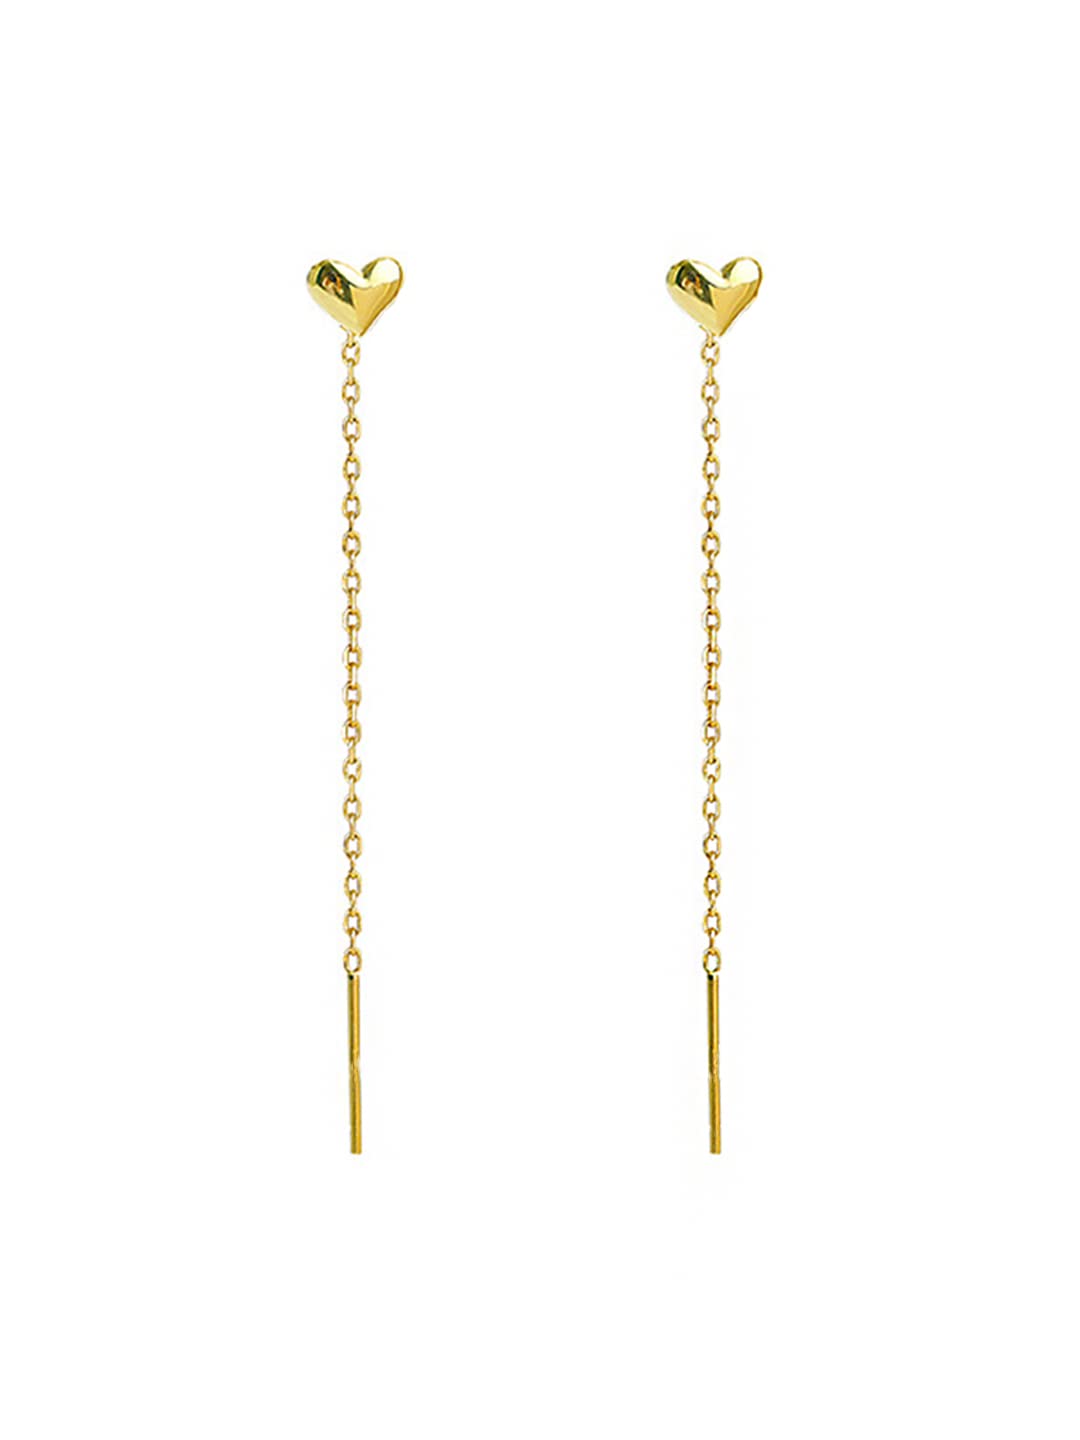 Yellow Chimes Threader Earrings for Women Gold Plated Heart Shaped Long Chain Threader Earrings For Women and Girls